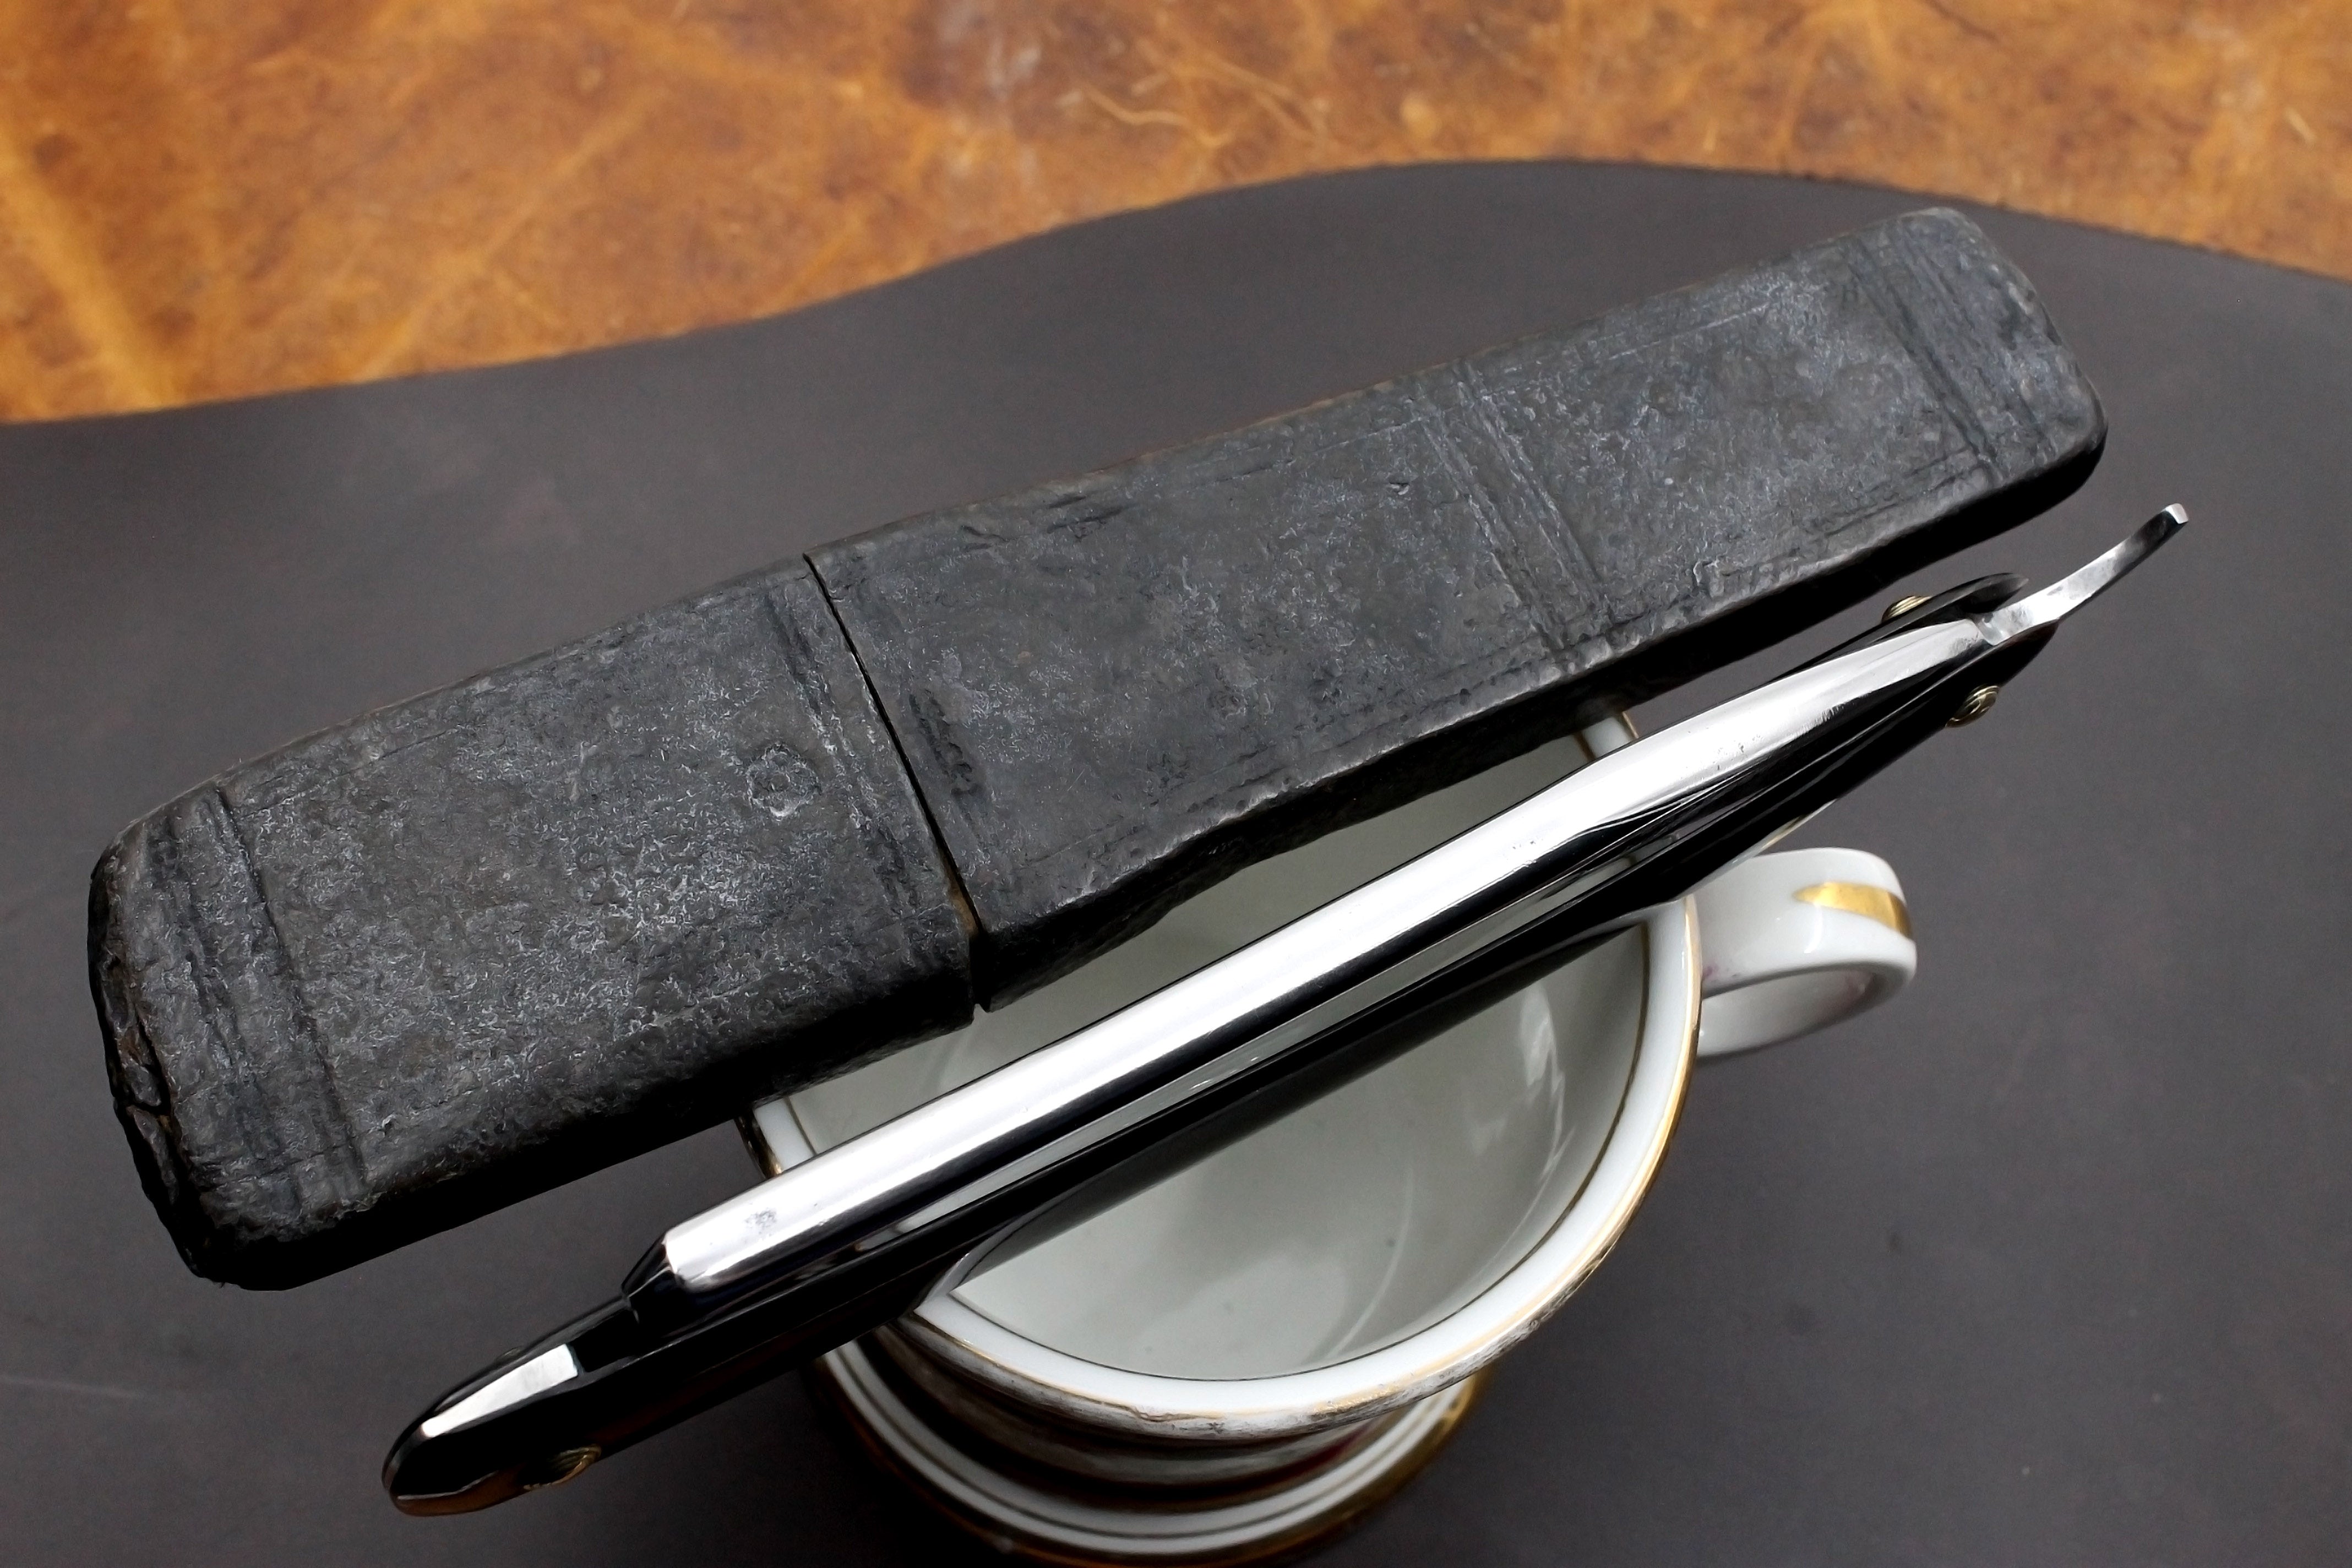 Wade & Butcher - Excellent Restored 15/16" Vintage Sheffield Straight Razor with Original Horn Scales - Shave Ready